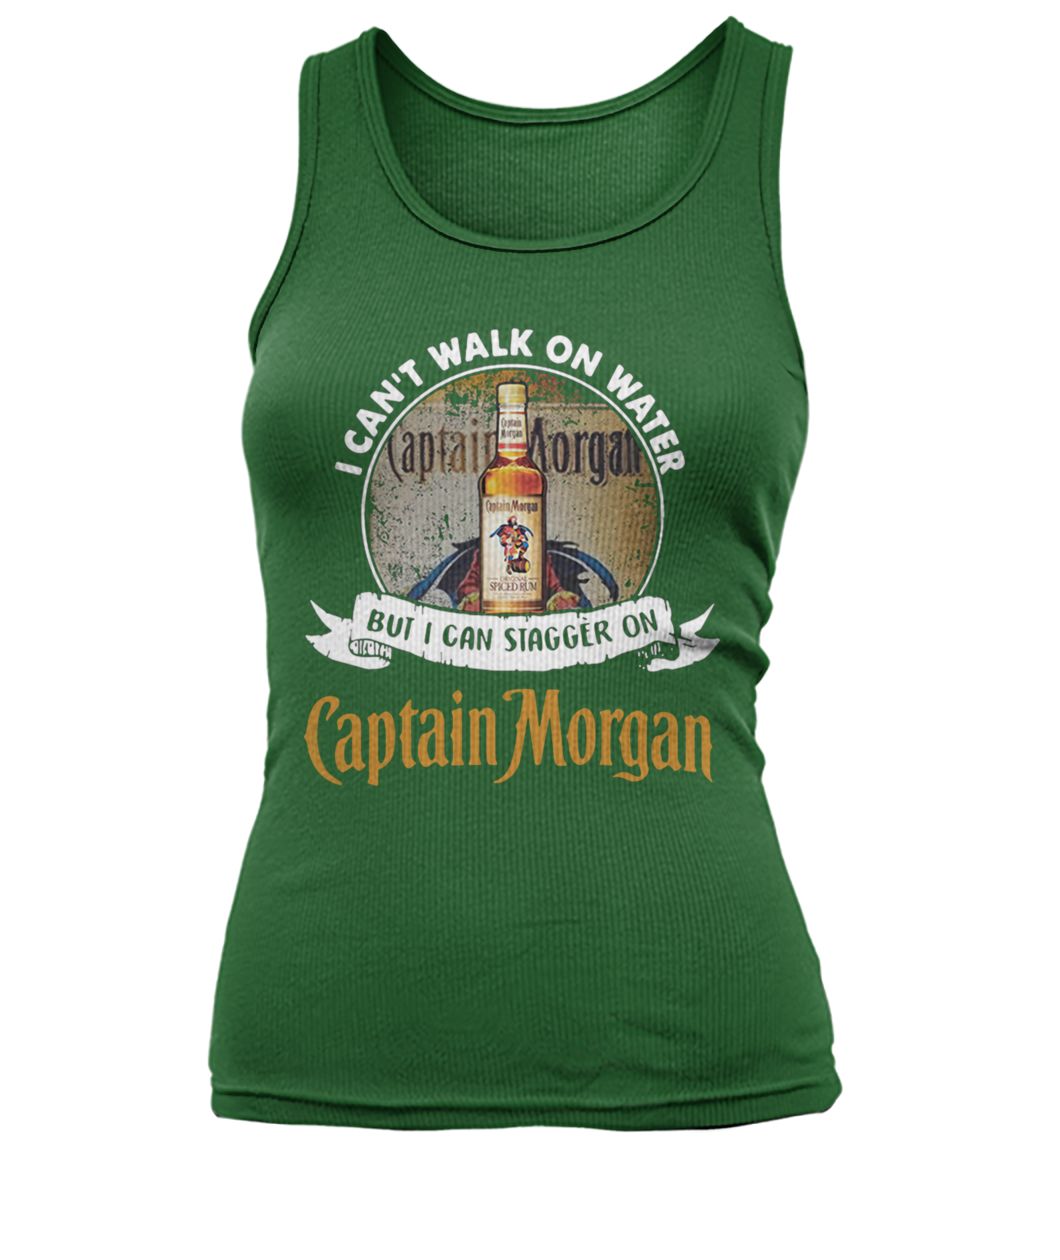 I can't walk on water but I can stagger on Captain Morgan women's tank top